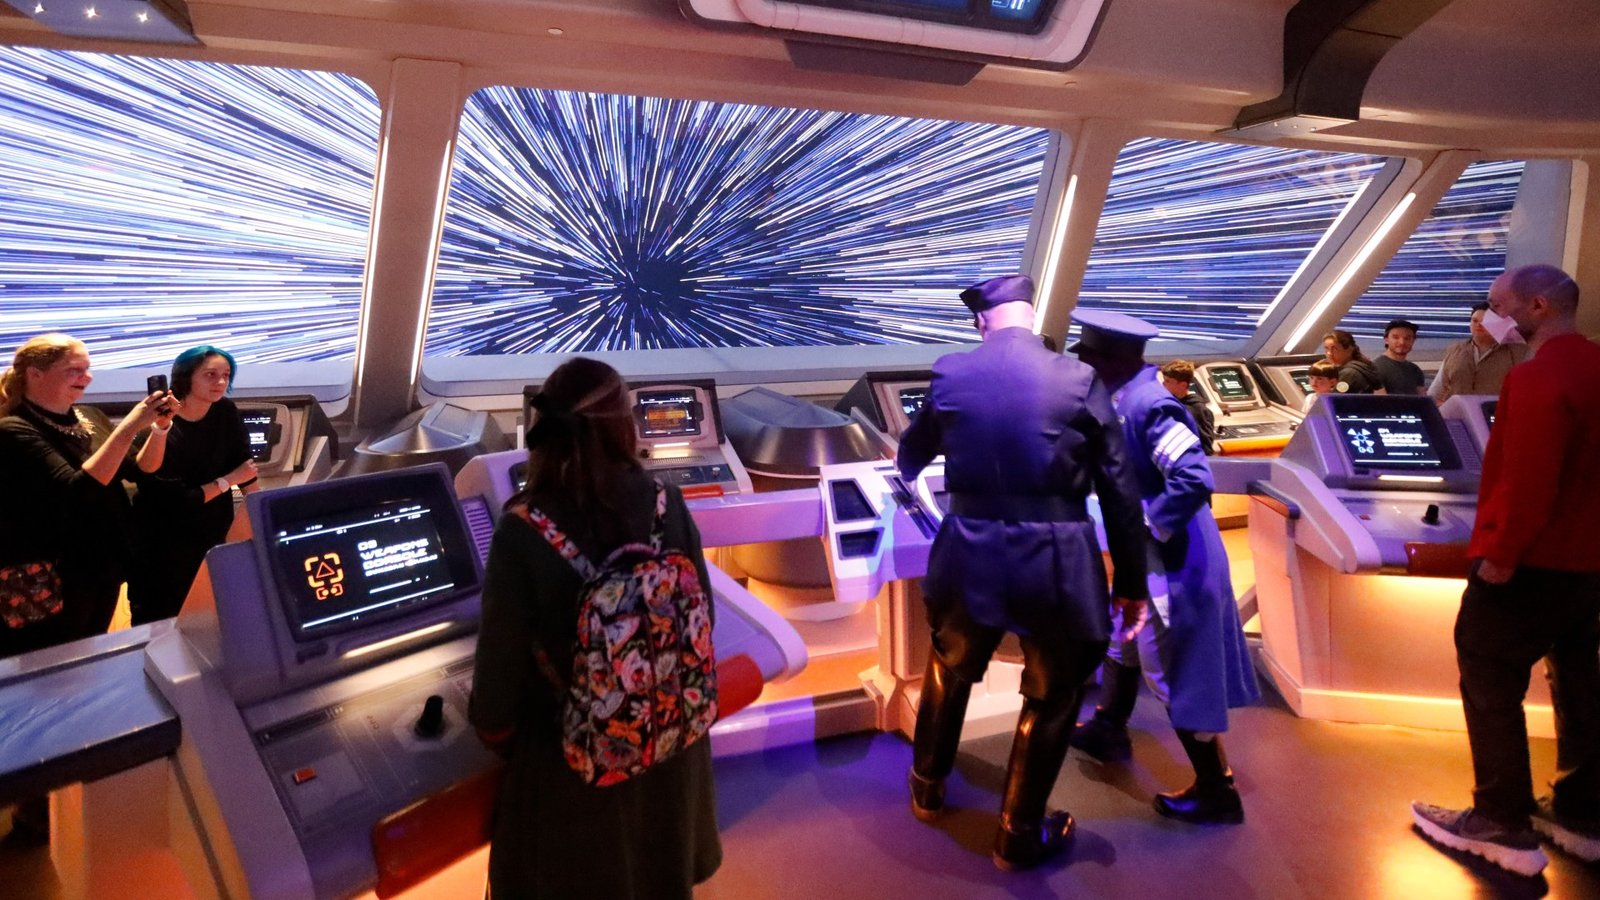 Inside the collapse of Disneys $300million Star Wars hotel where two night voyage on fake spaceship cost up to $20k